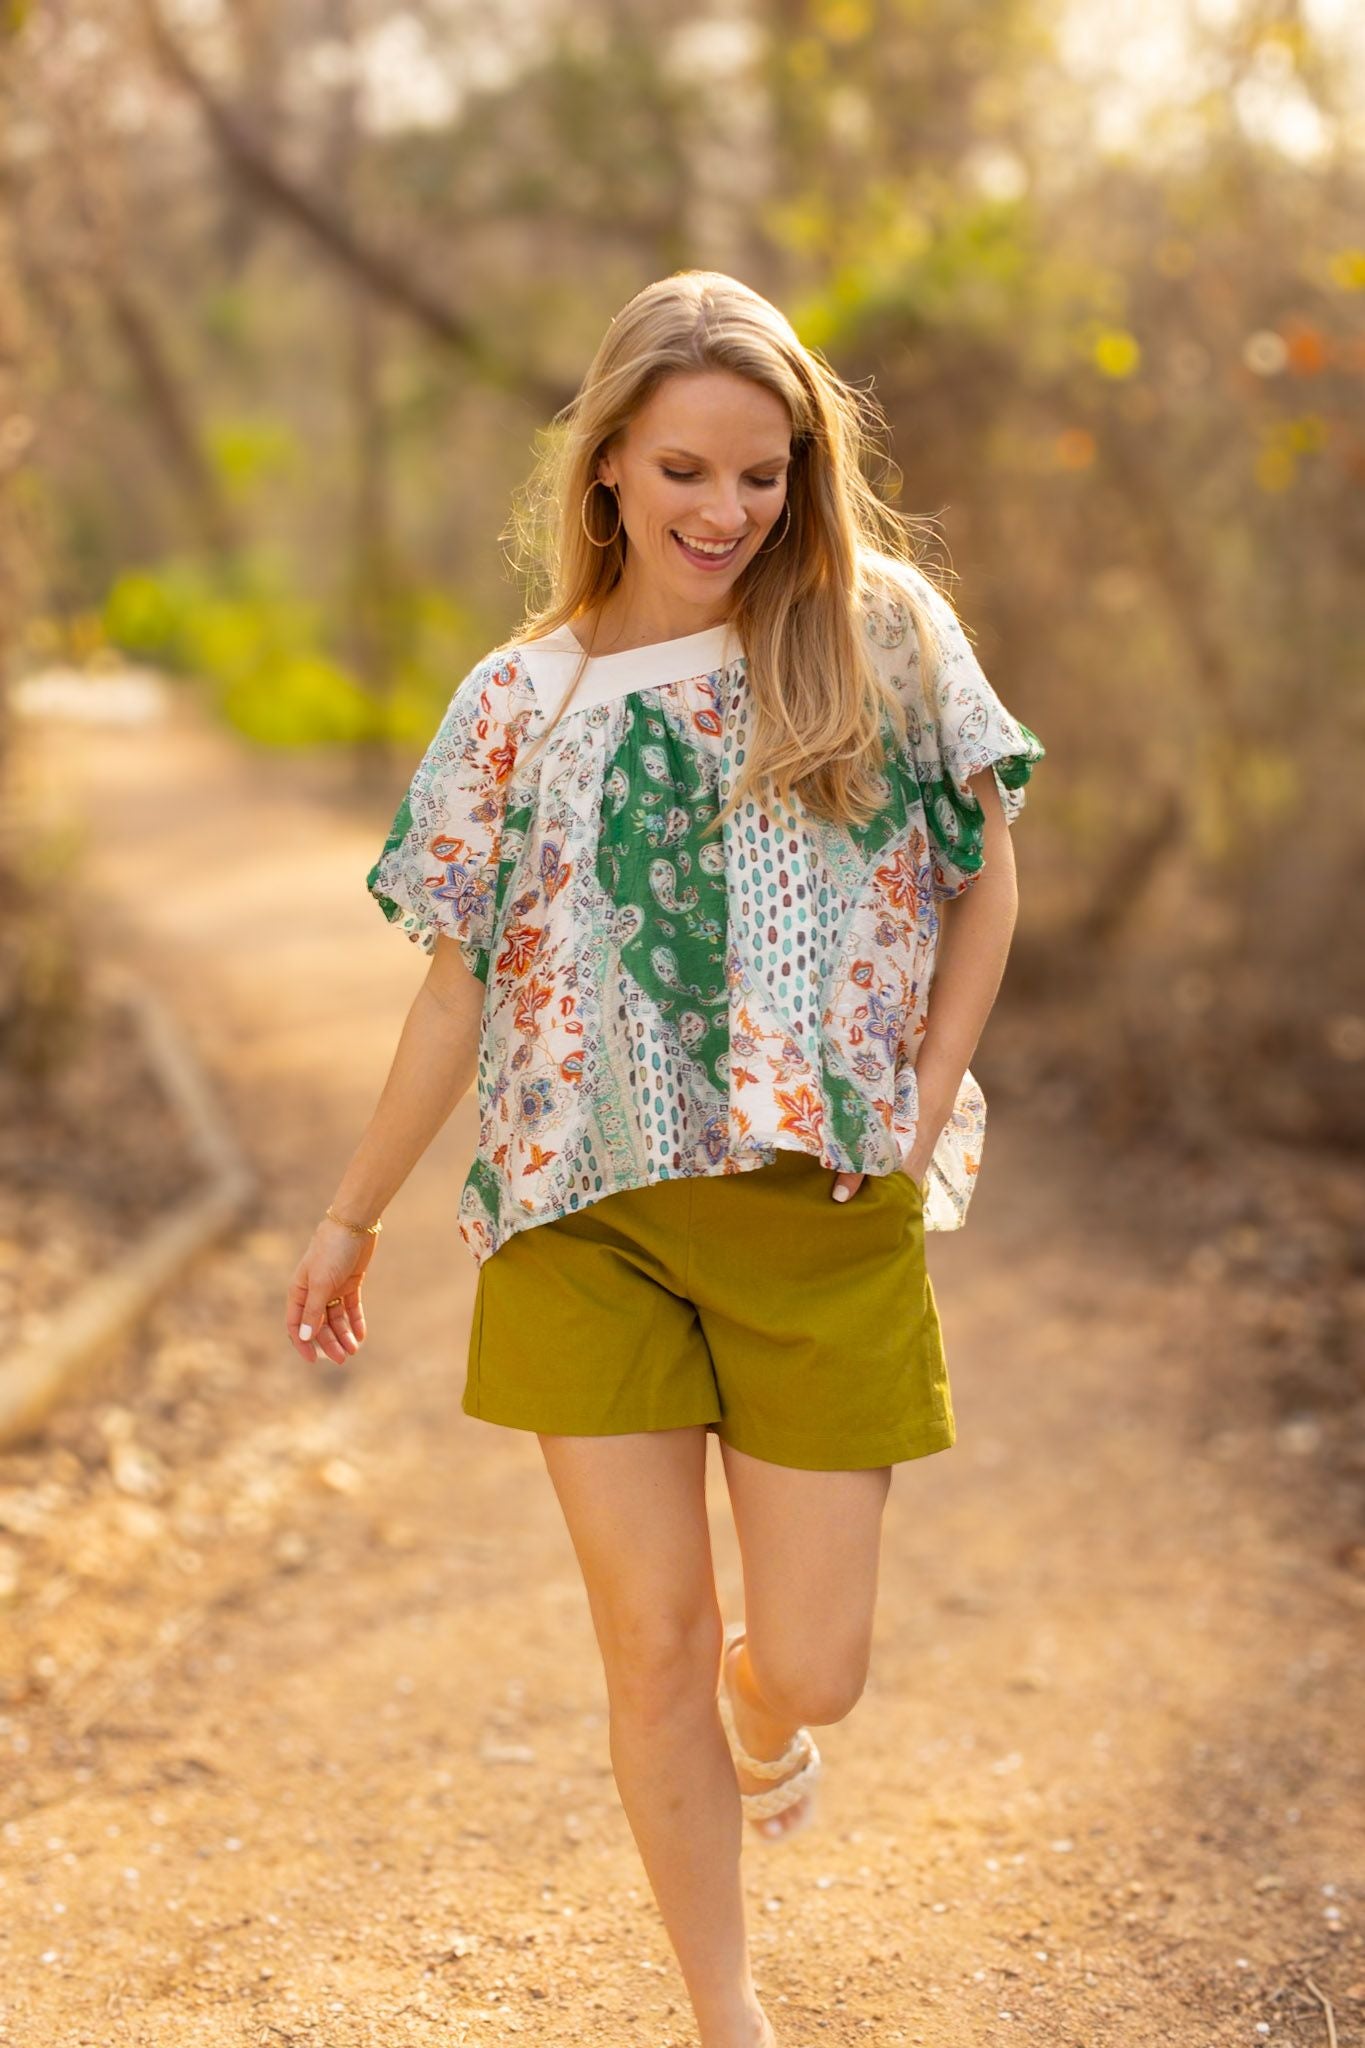 The Rosemary Ivory & Green Square Neck Puff Blouse